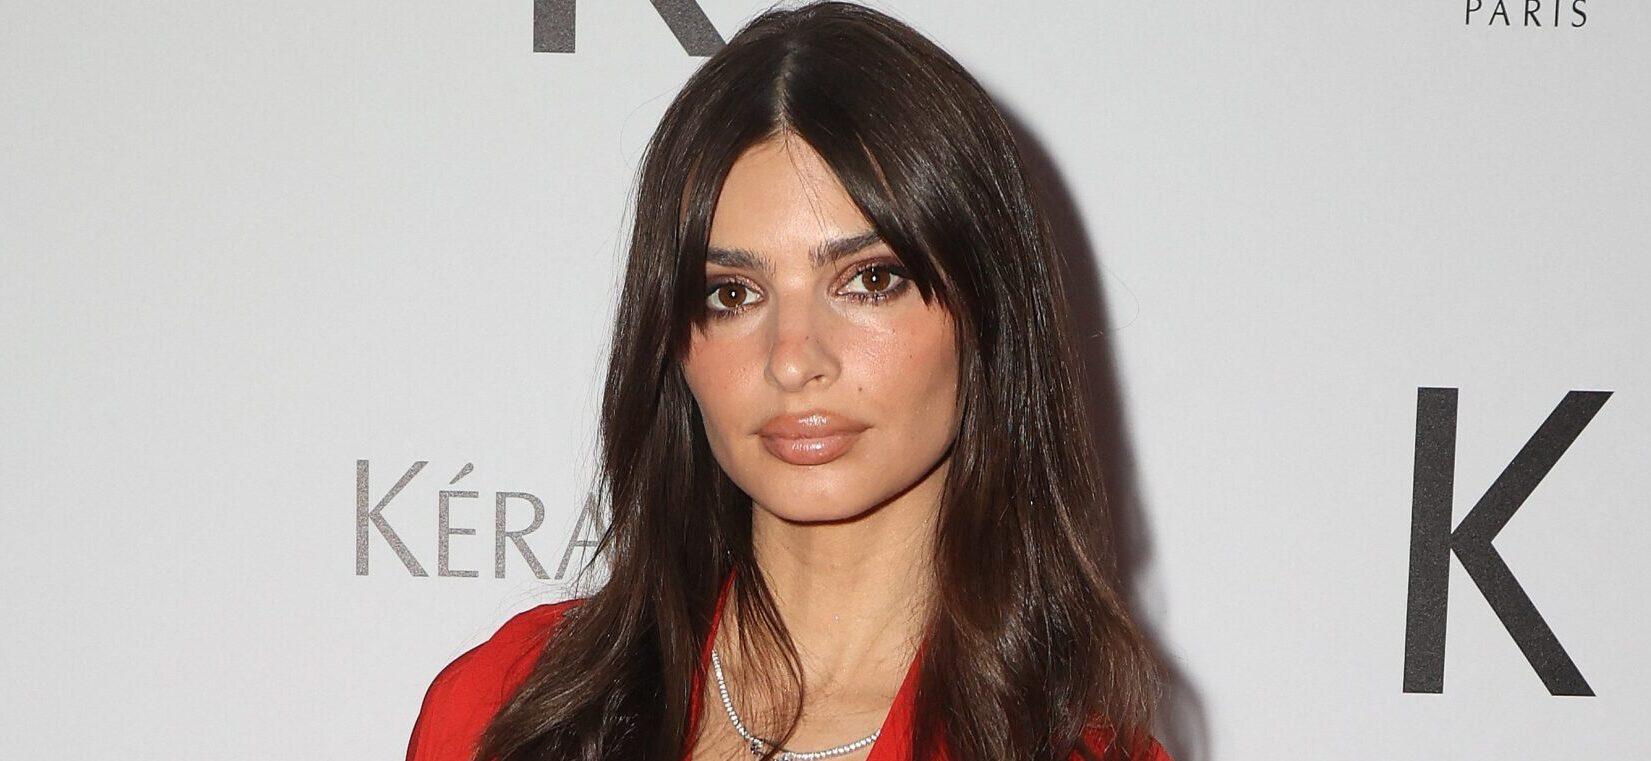 Emily Ratajkowski Set To Open Up About Her Divorce In Upcoming Memoir